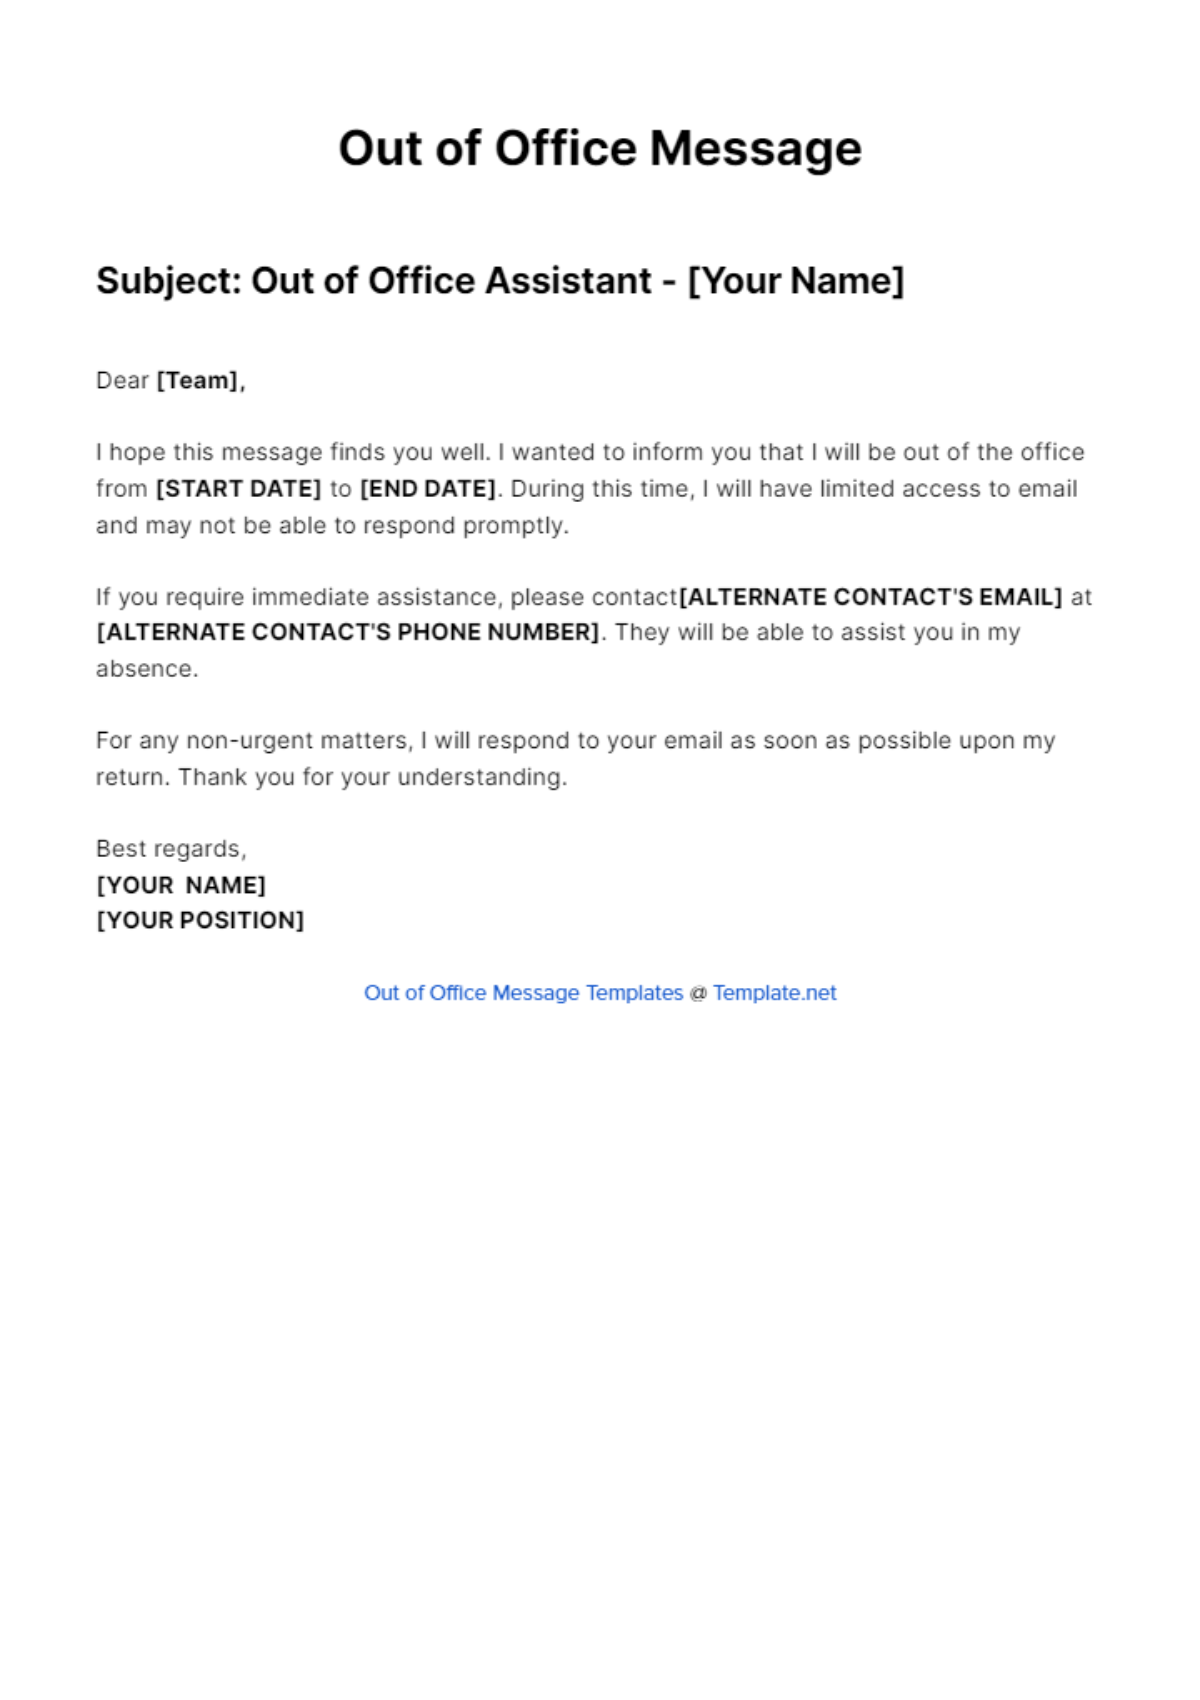 Out Of Office Assistant Message Template